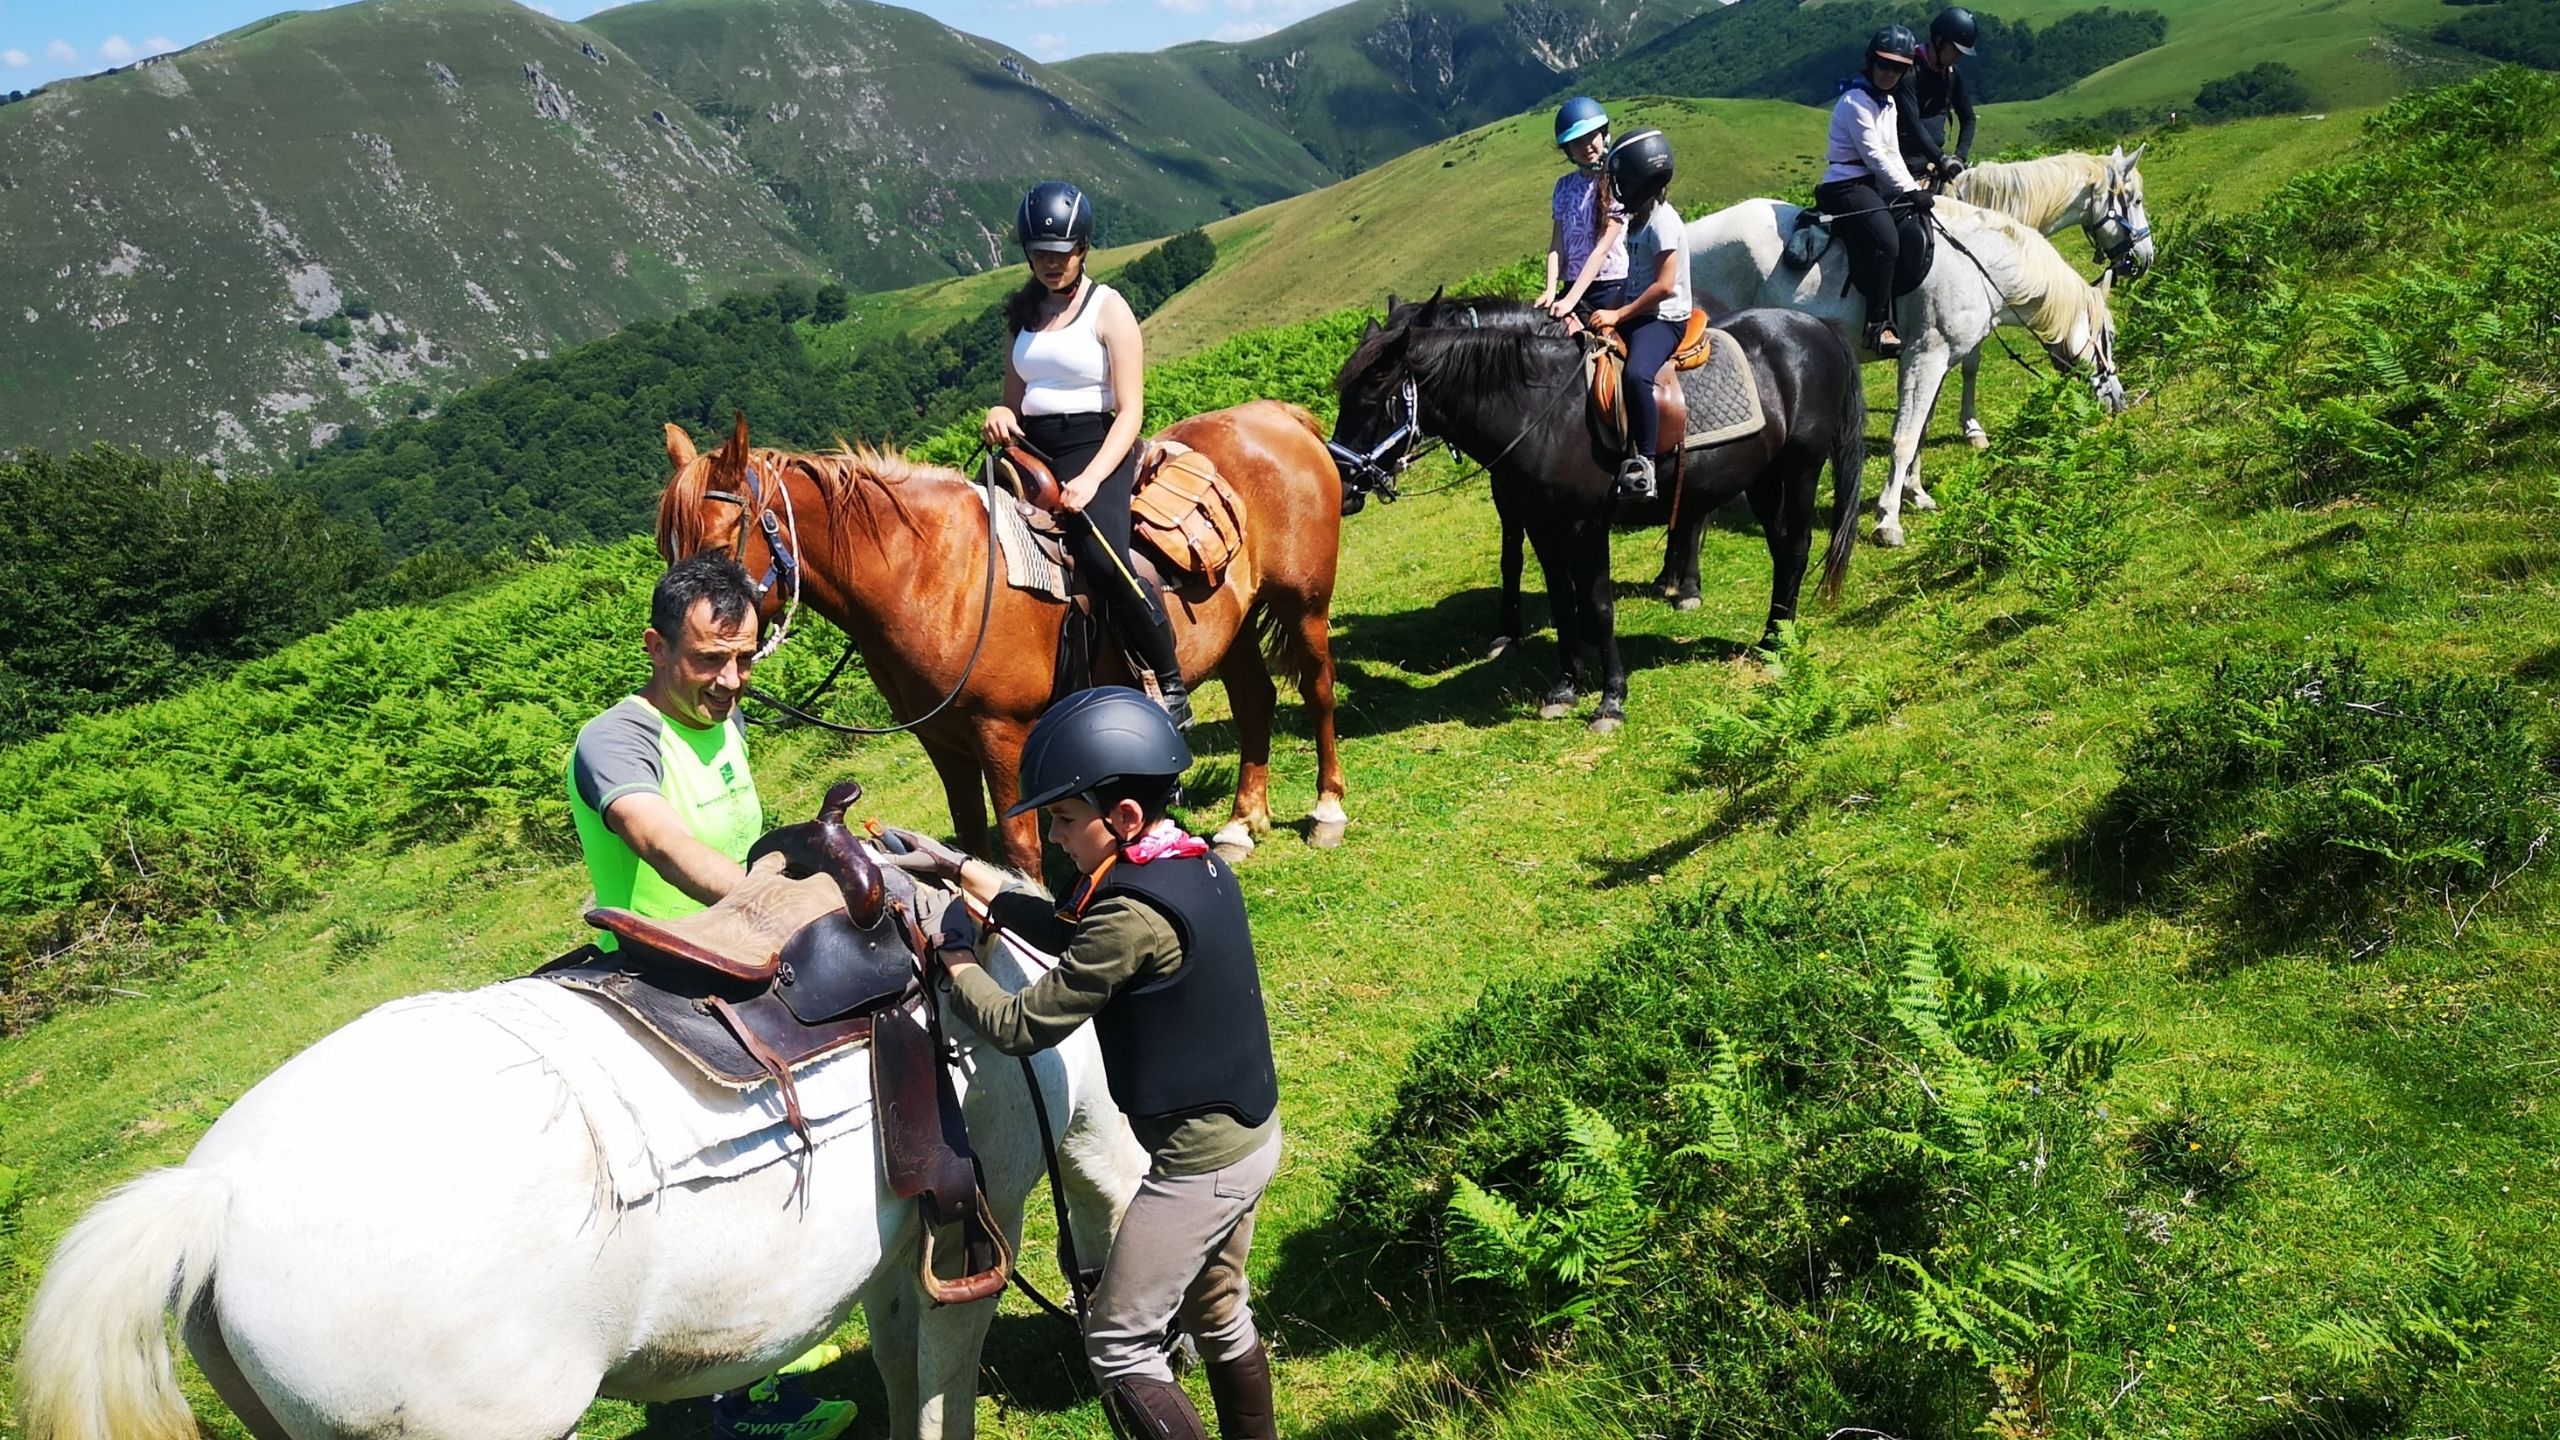 Family equestrian activity for all ages